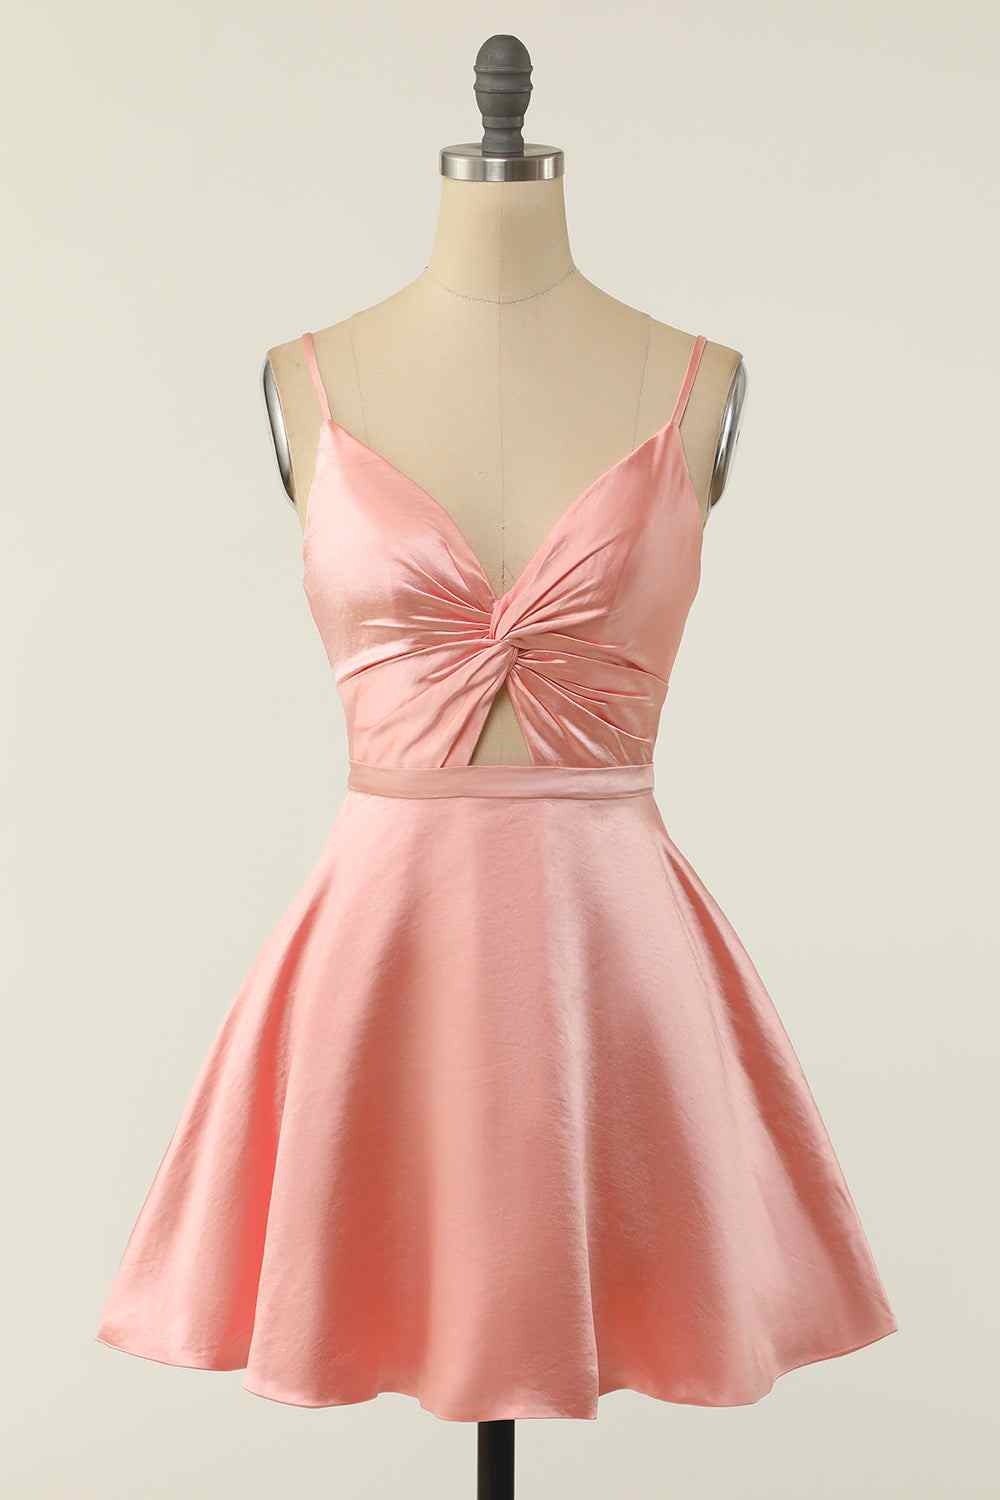 Pink A-line V Neck Twist Knot Cut-Out Pleated Mini Homecoming Dress